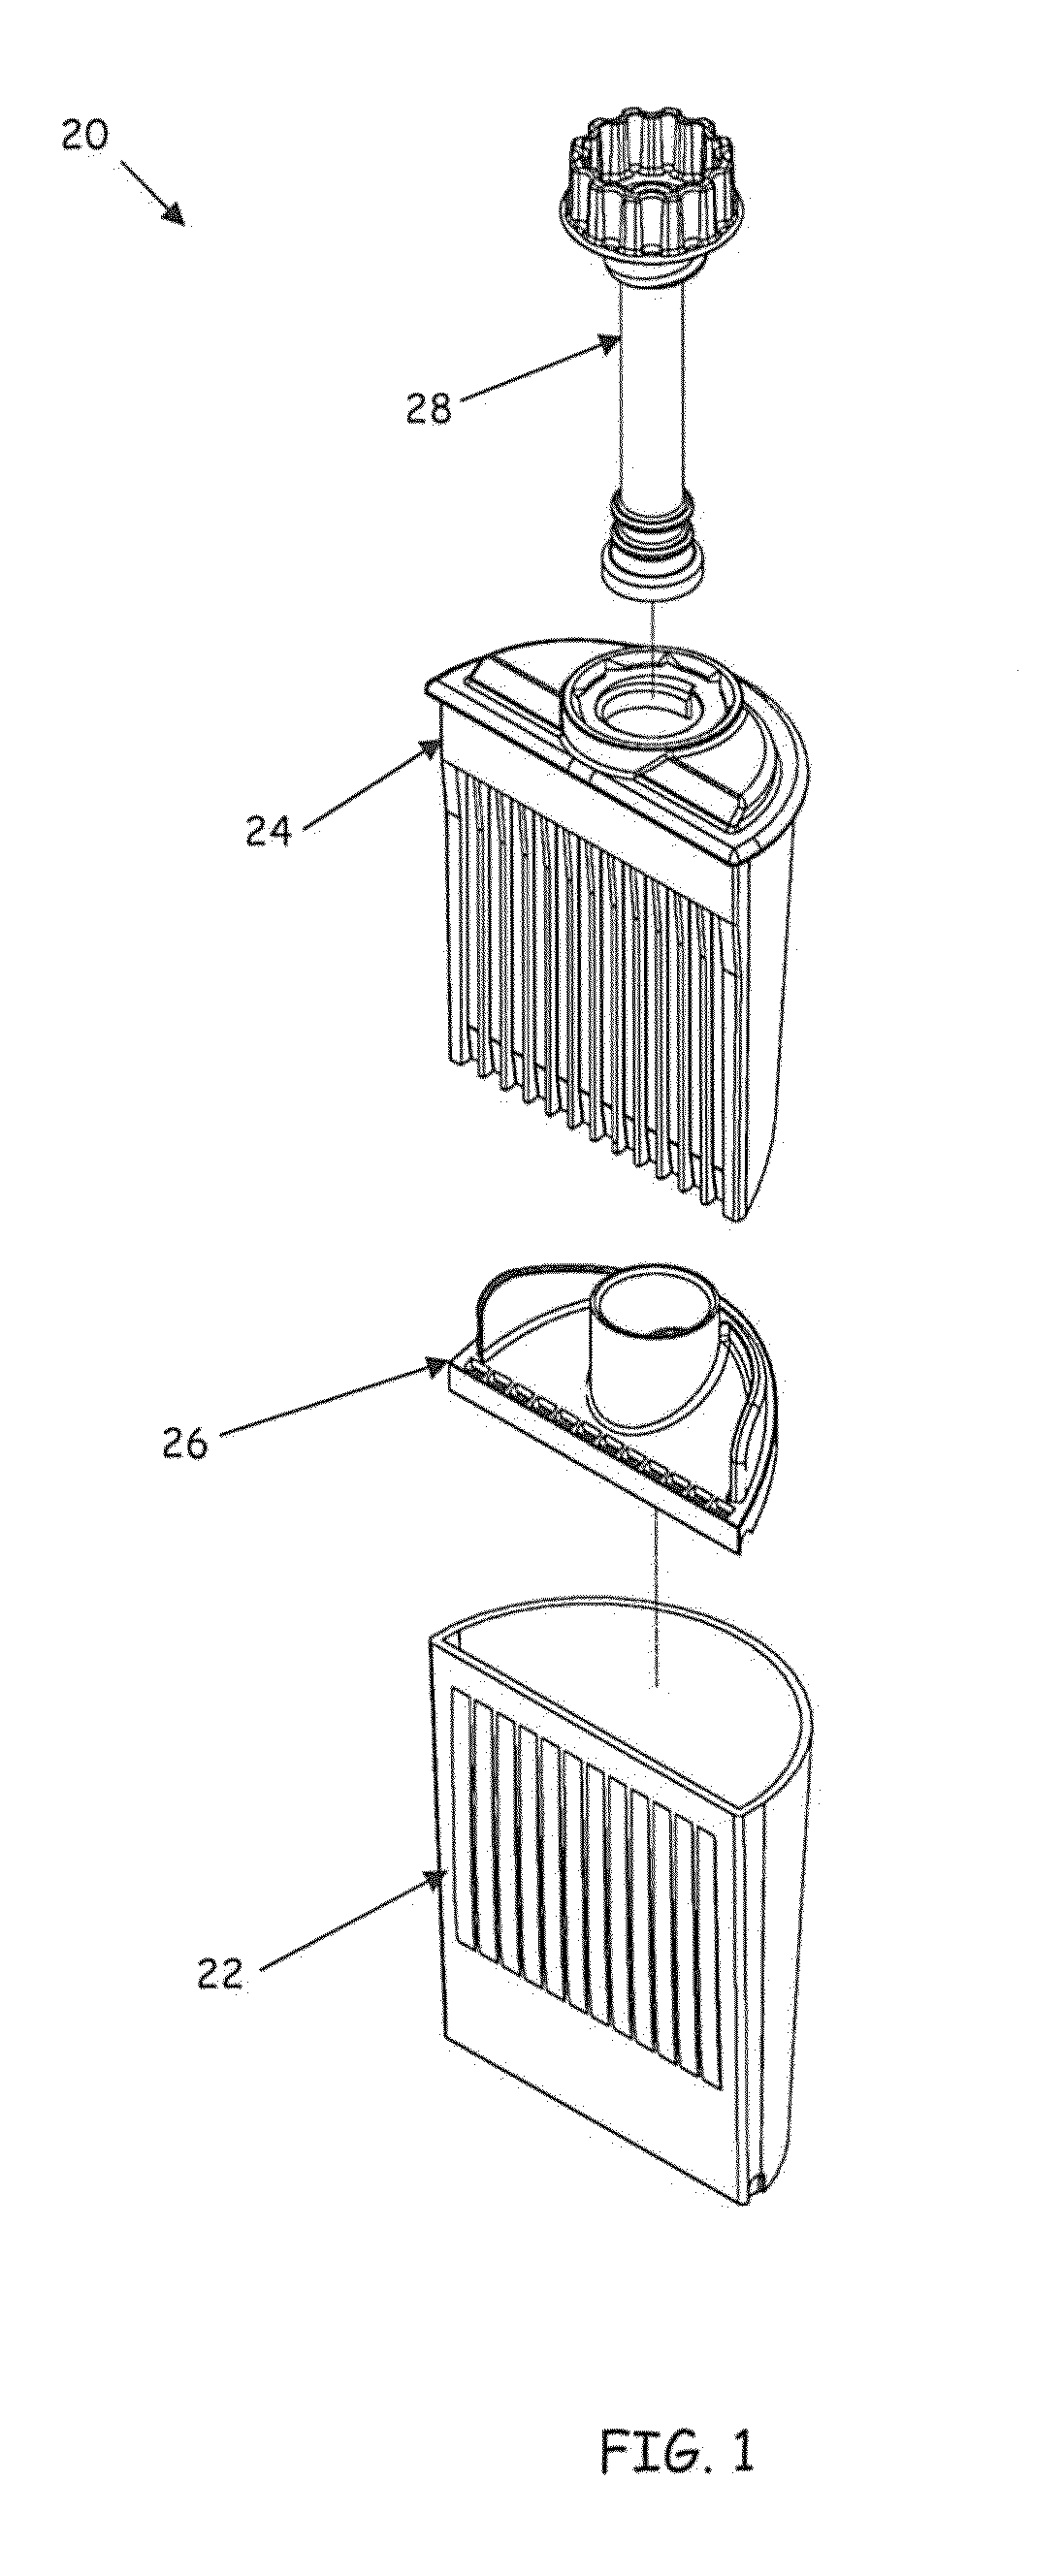 Screening device for analysis of bodily fluids